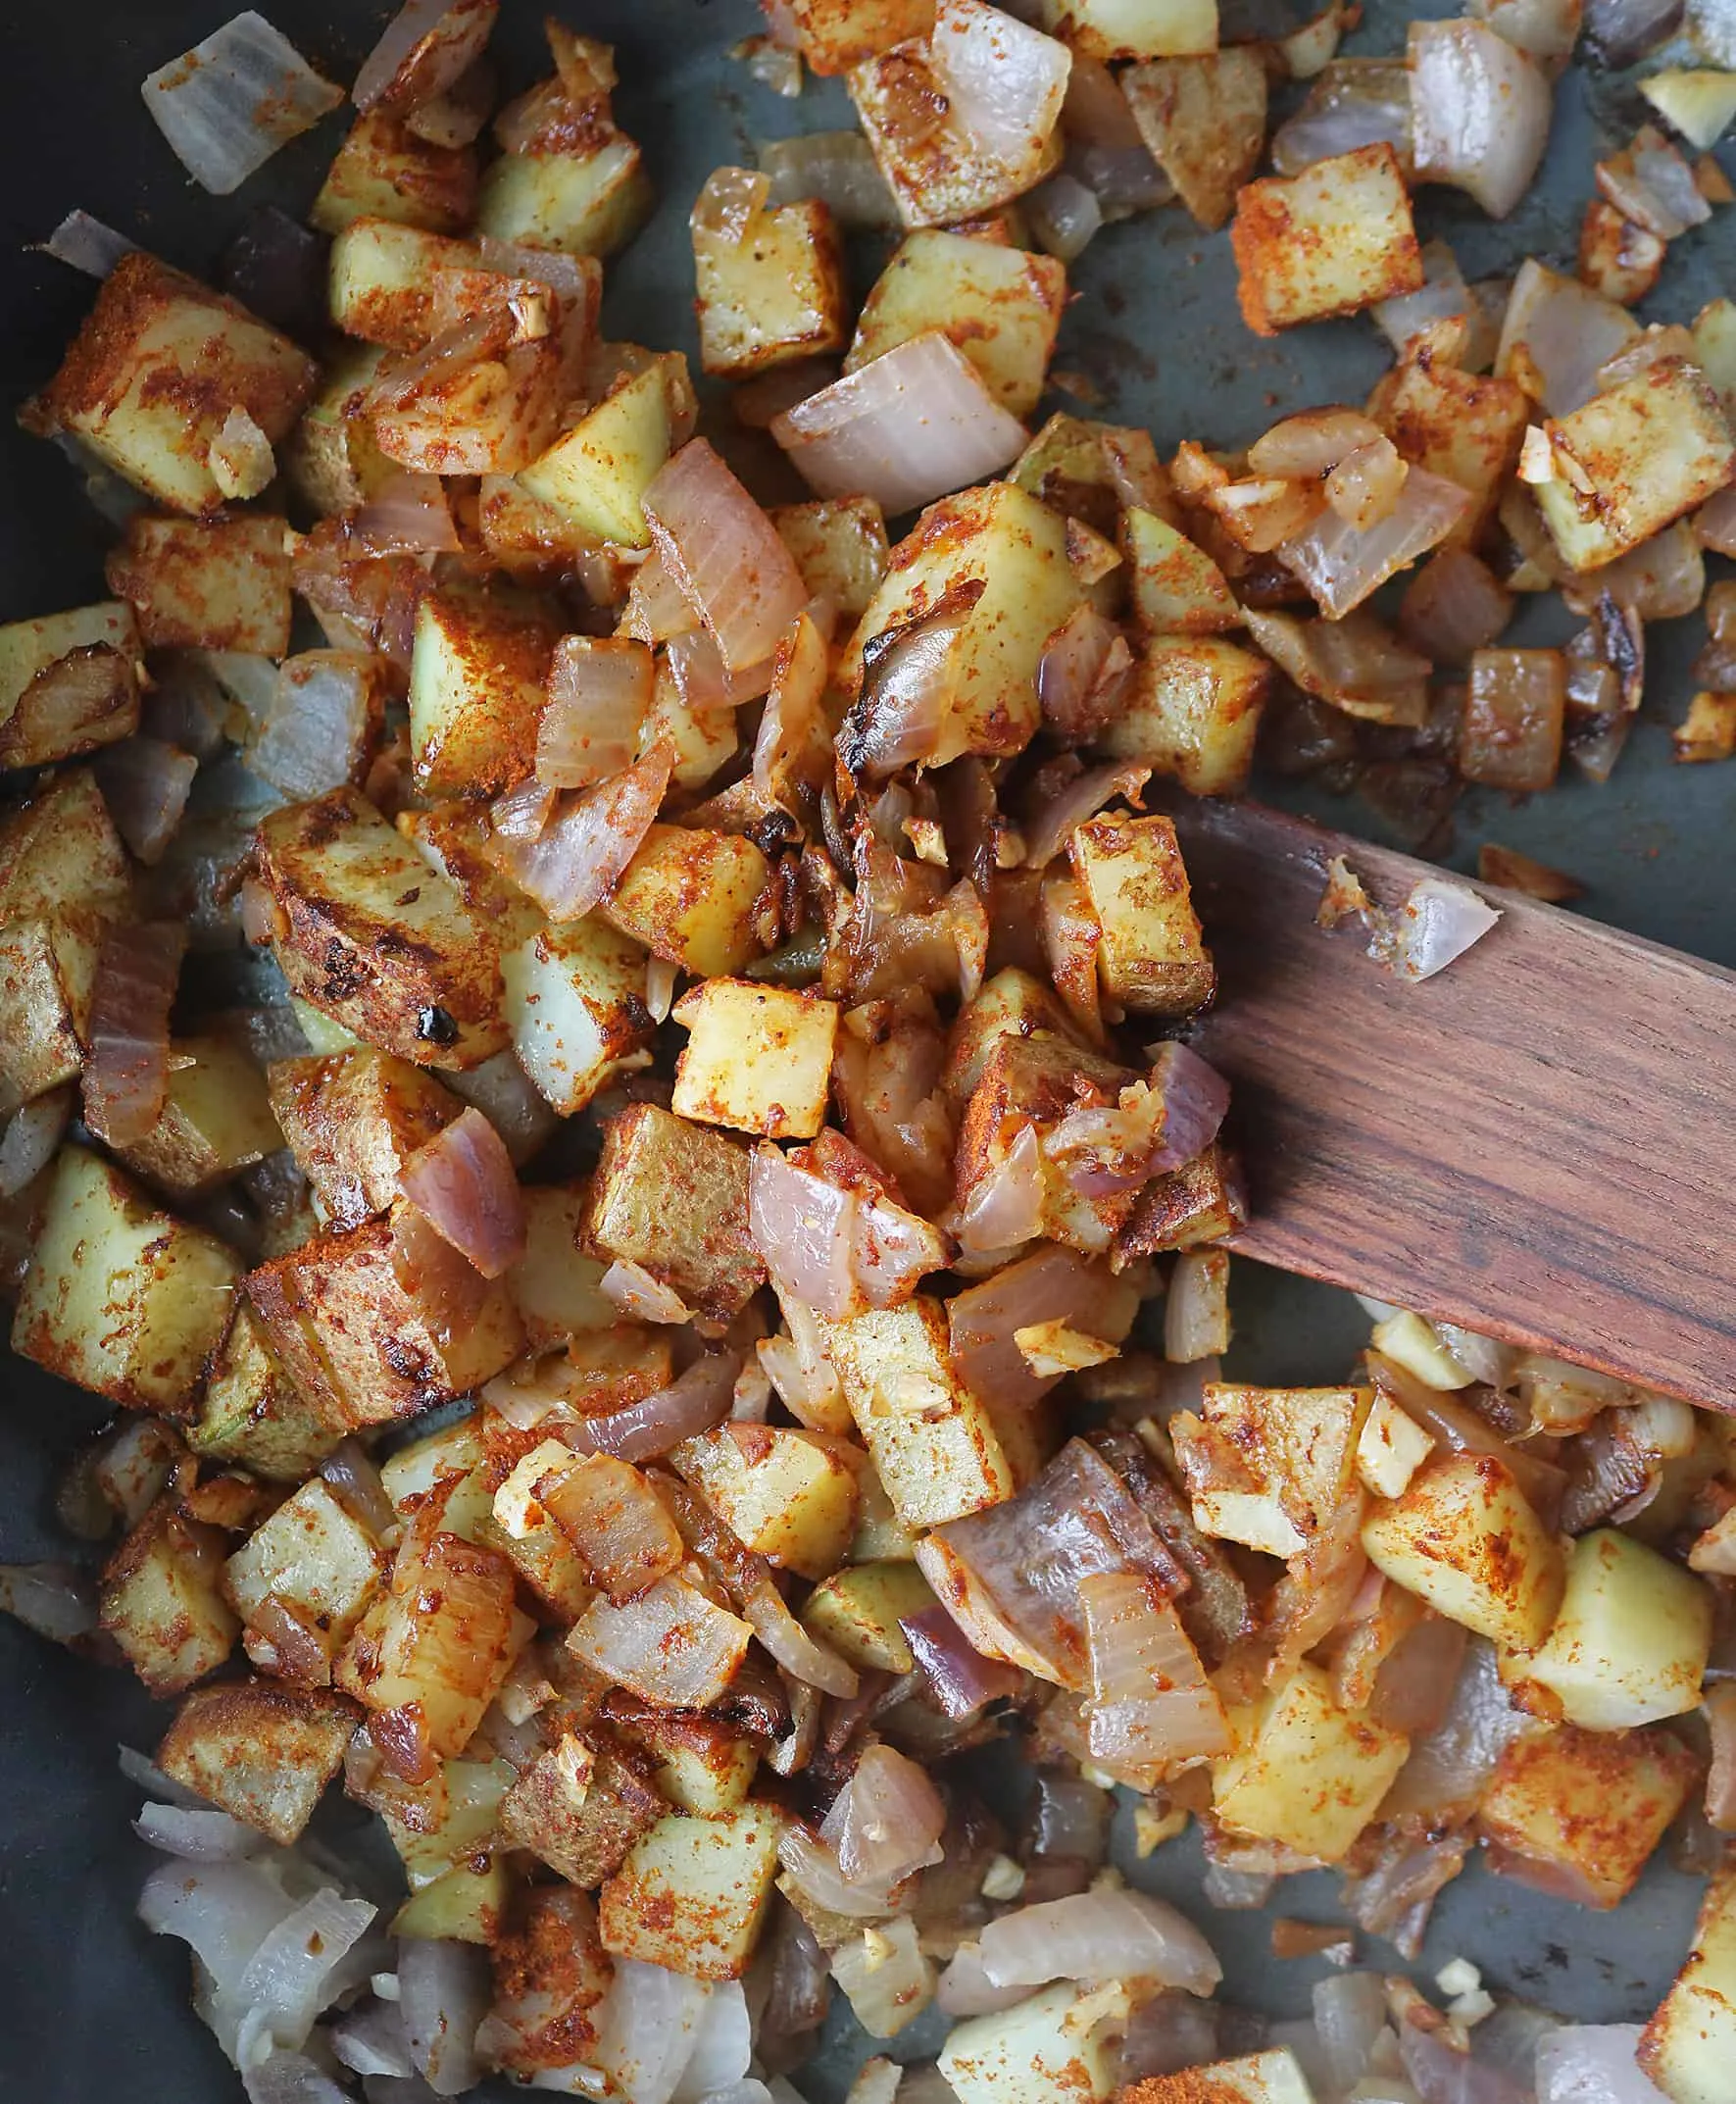 Cubed potatoes being sauteed with onions, garlic, ginger and Berbere seasoning.